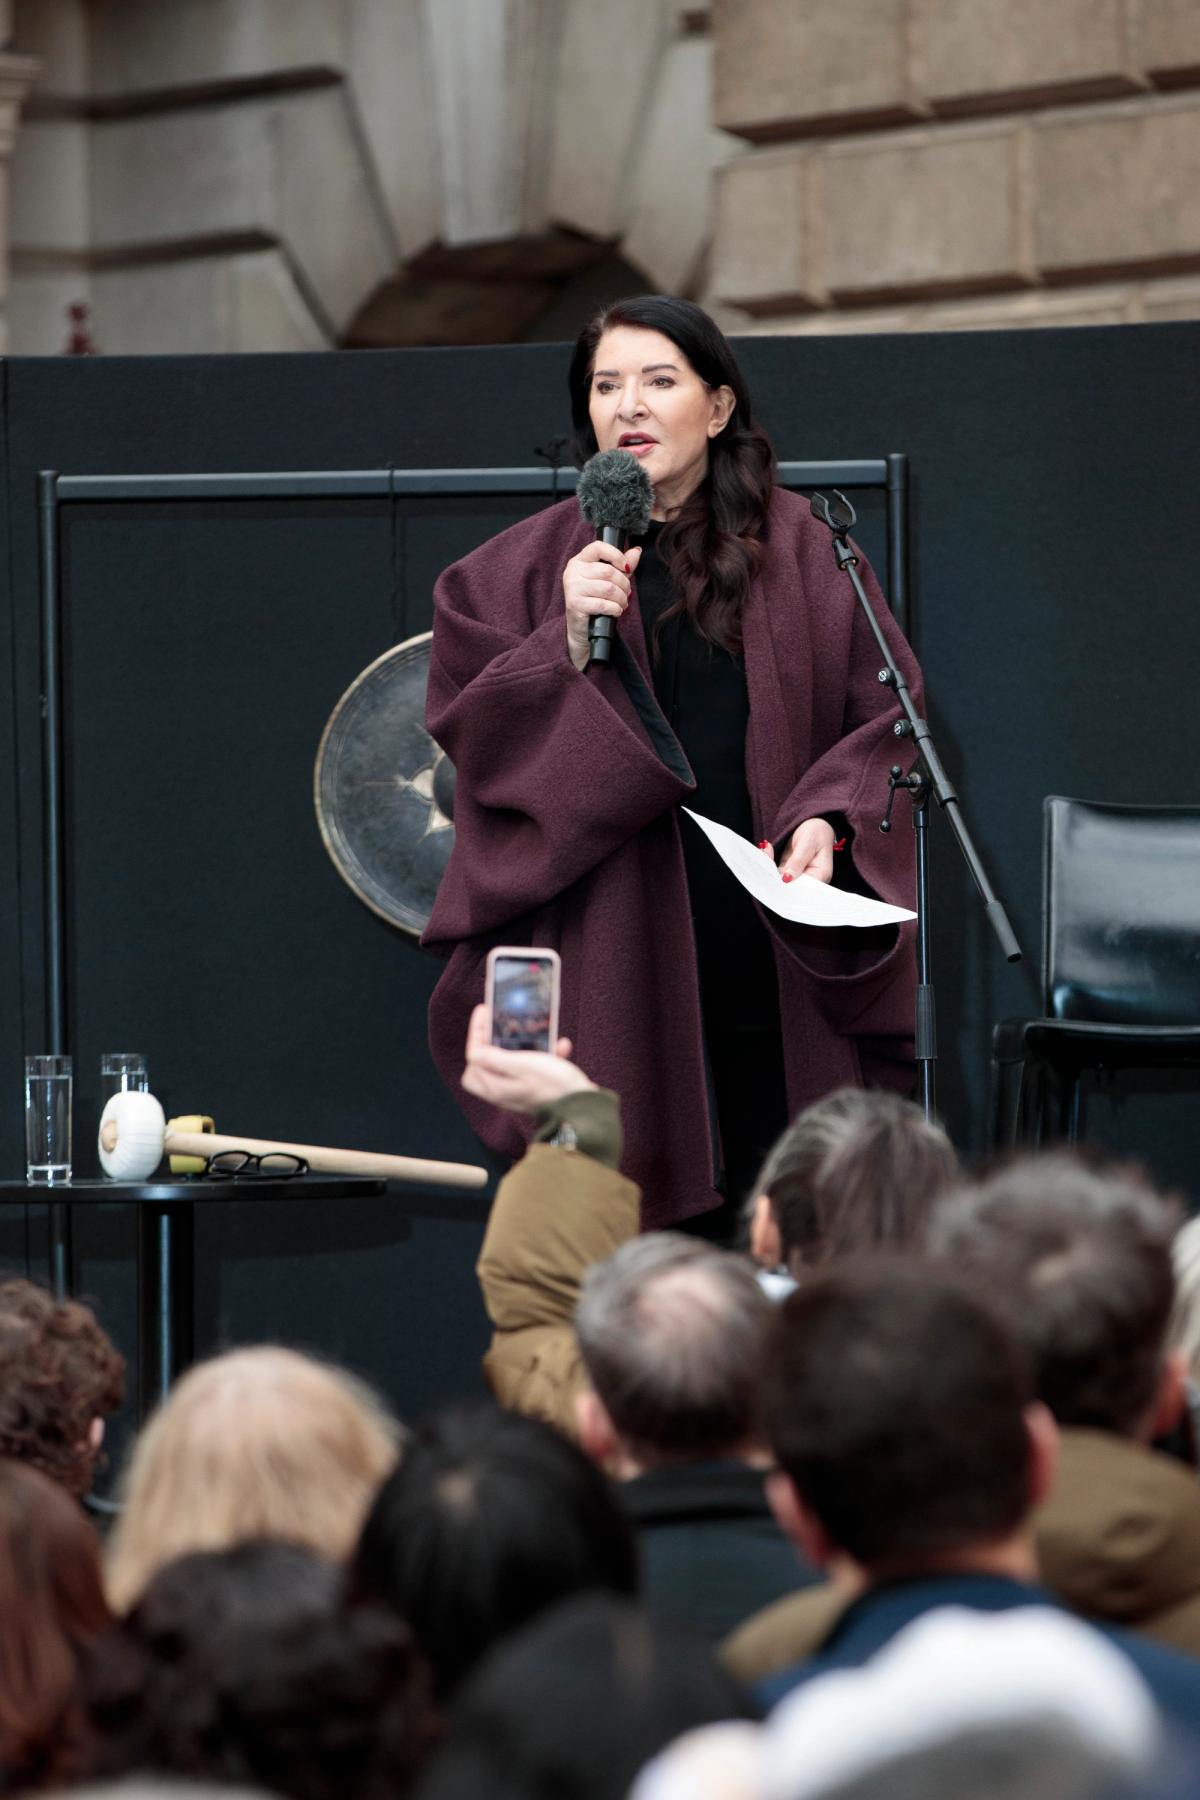 Marina Abramović performs An Invitation to Love Unconditionally in the Annenberg Courtyard at the Royal Academy of Arts, London. Her exhibition Marina Abramović is open until 1 January 2024. 

Photo: © John Phillips / Getty Images for the Royal Academy of Arts.